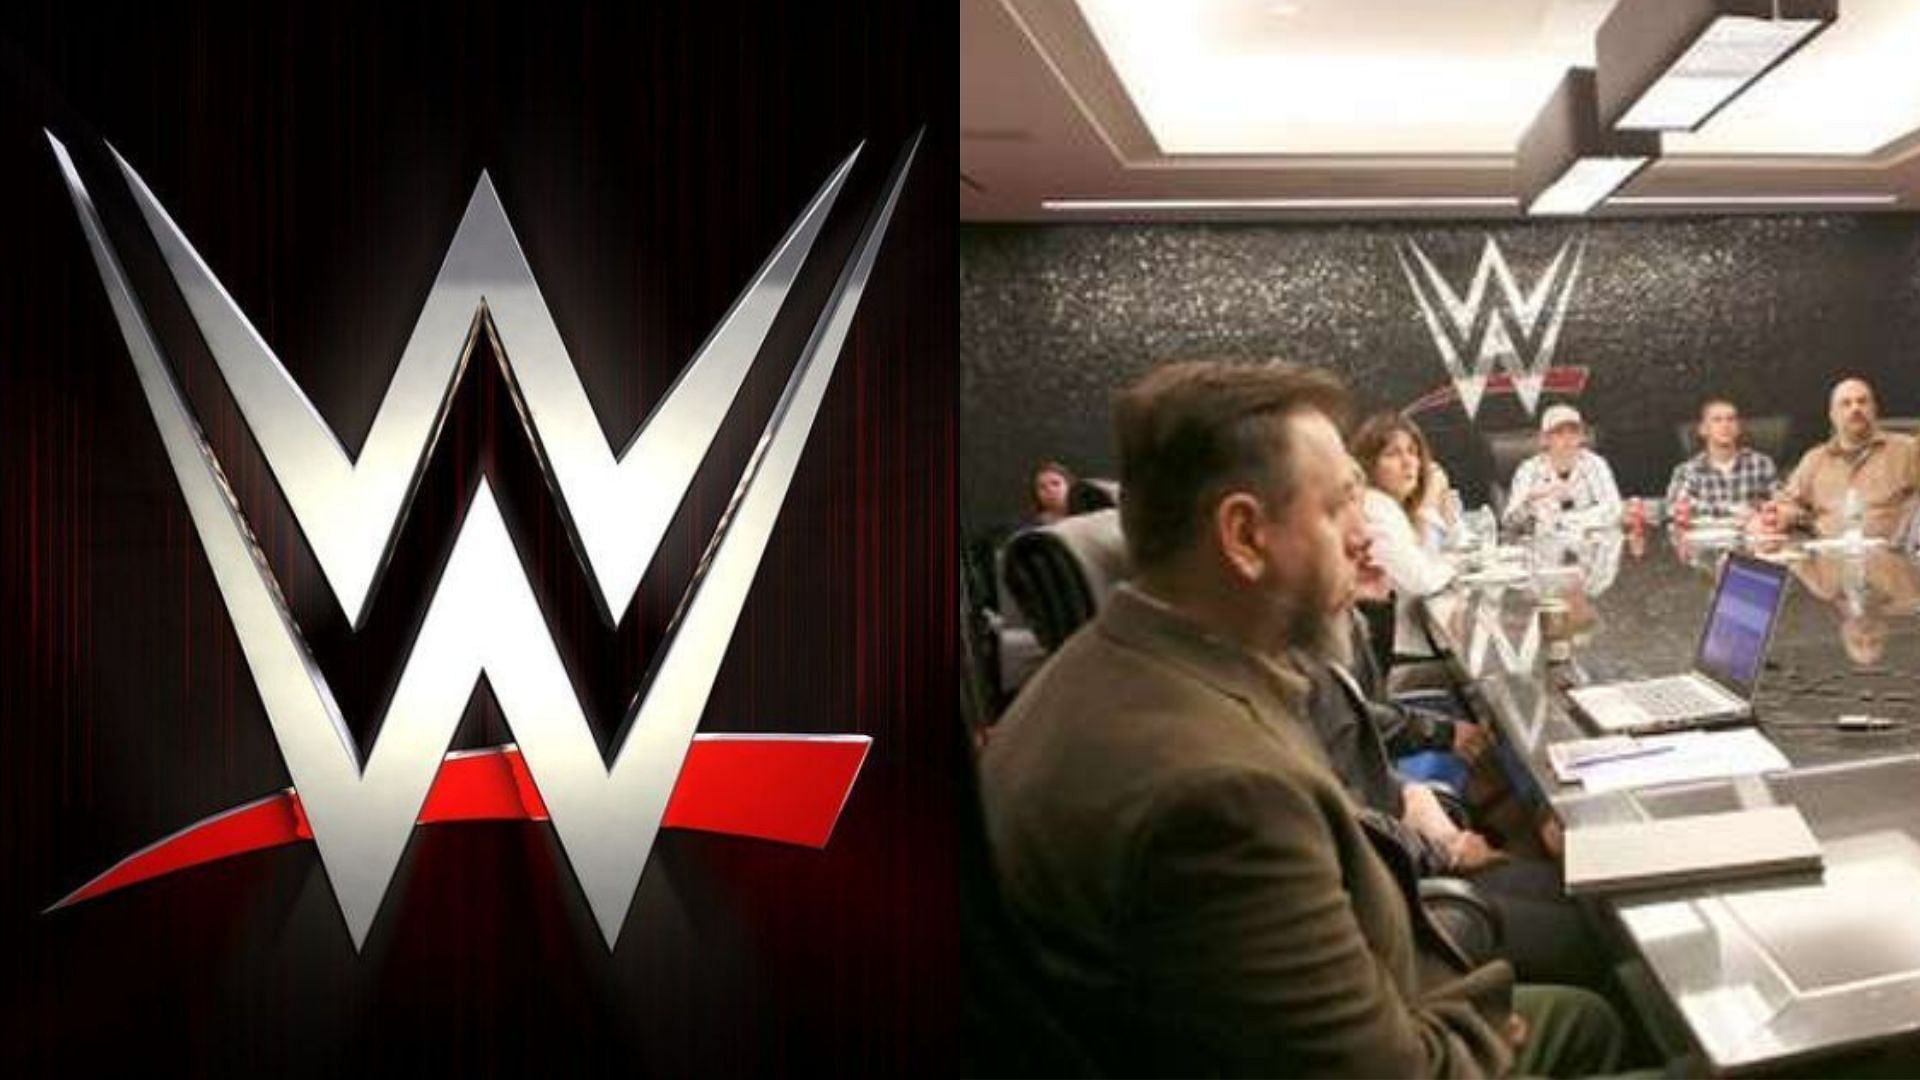 The WWE creative process has undergone many changes over the years.